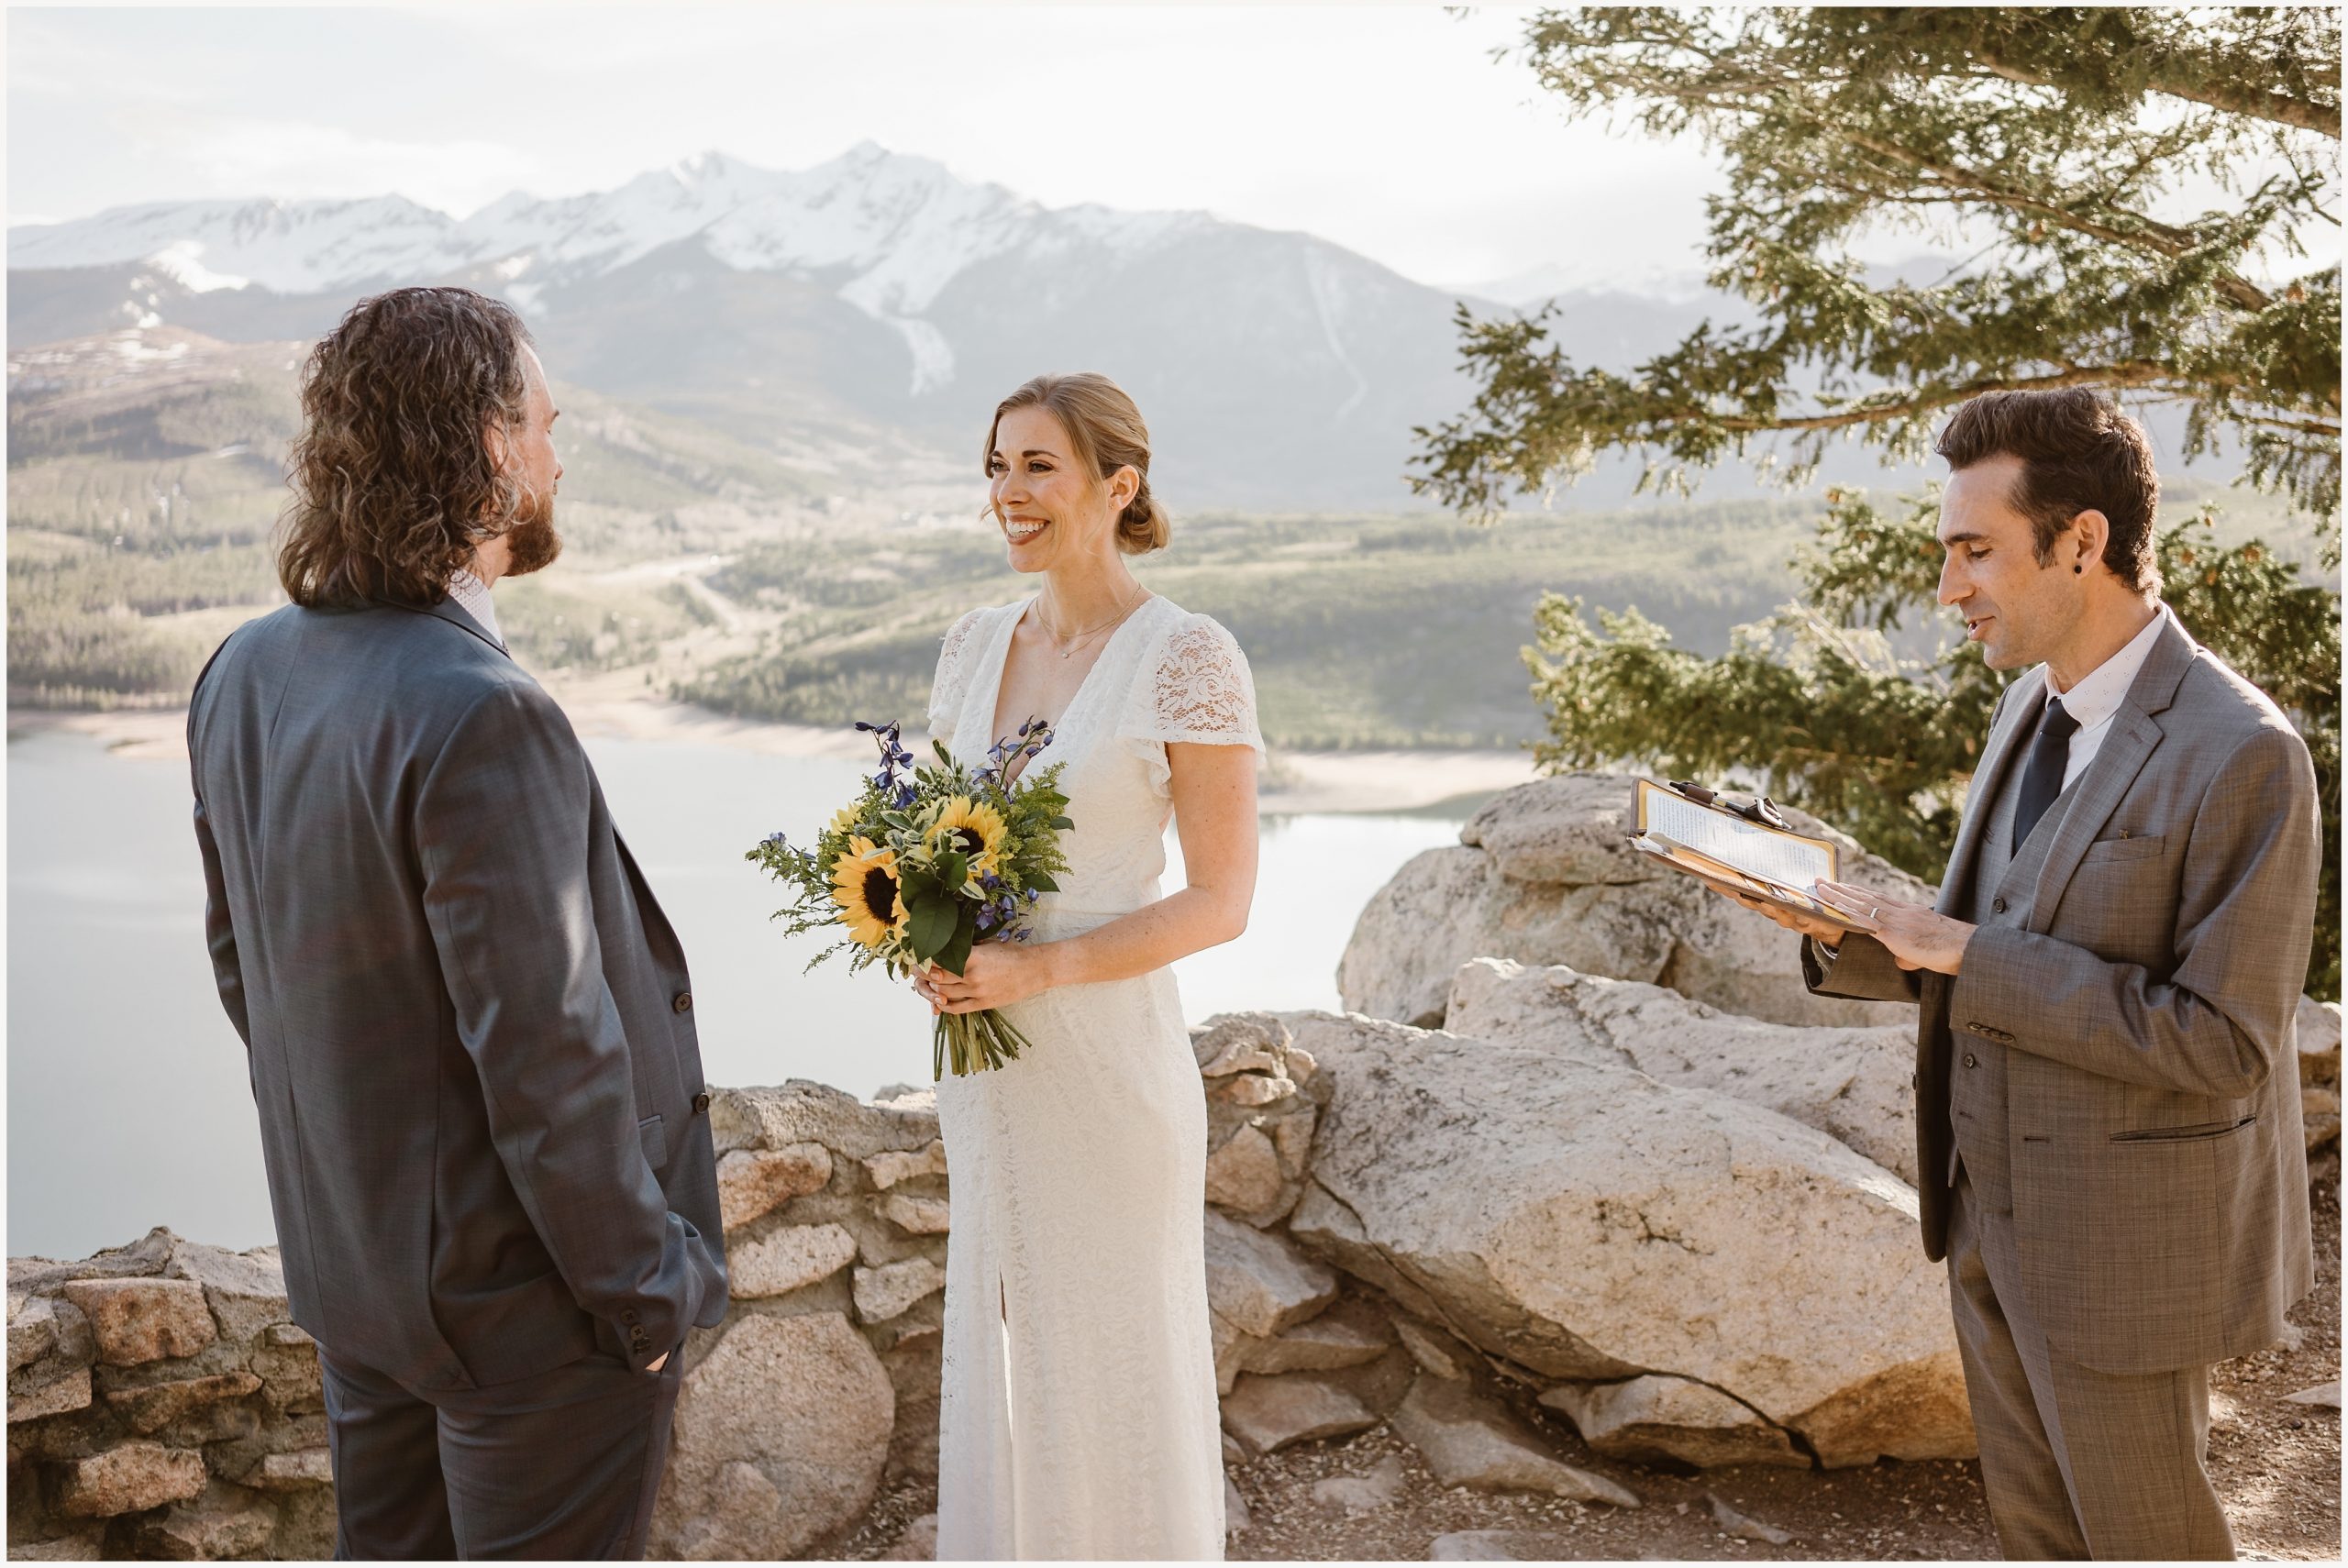 Couple sharing the vows at Sapphire Point in Breckenridge, Colorado